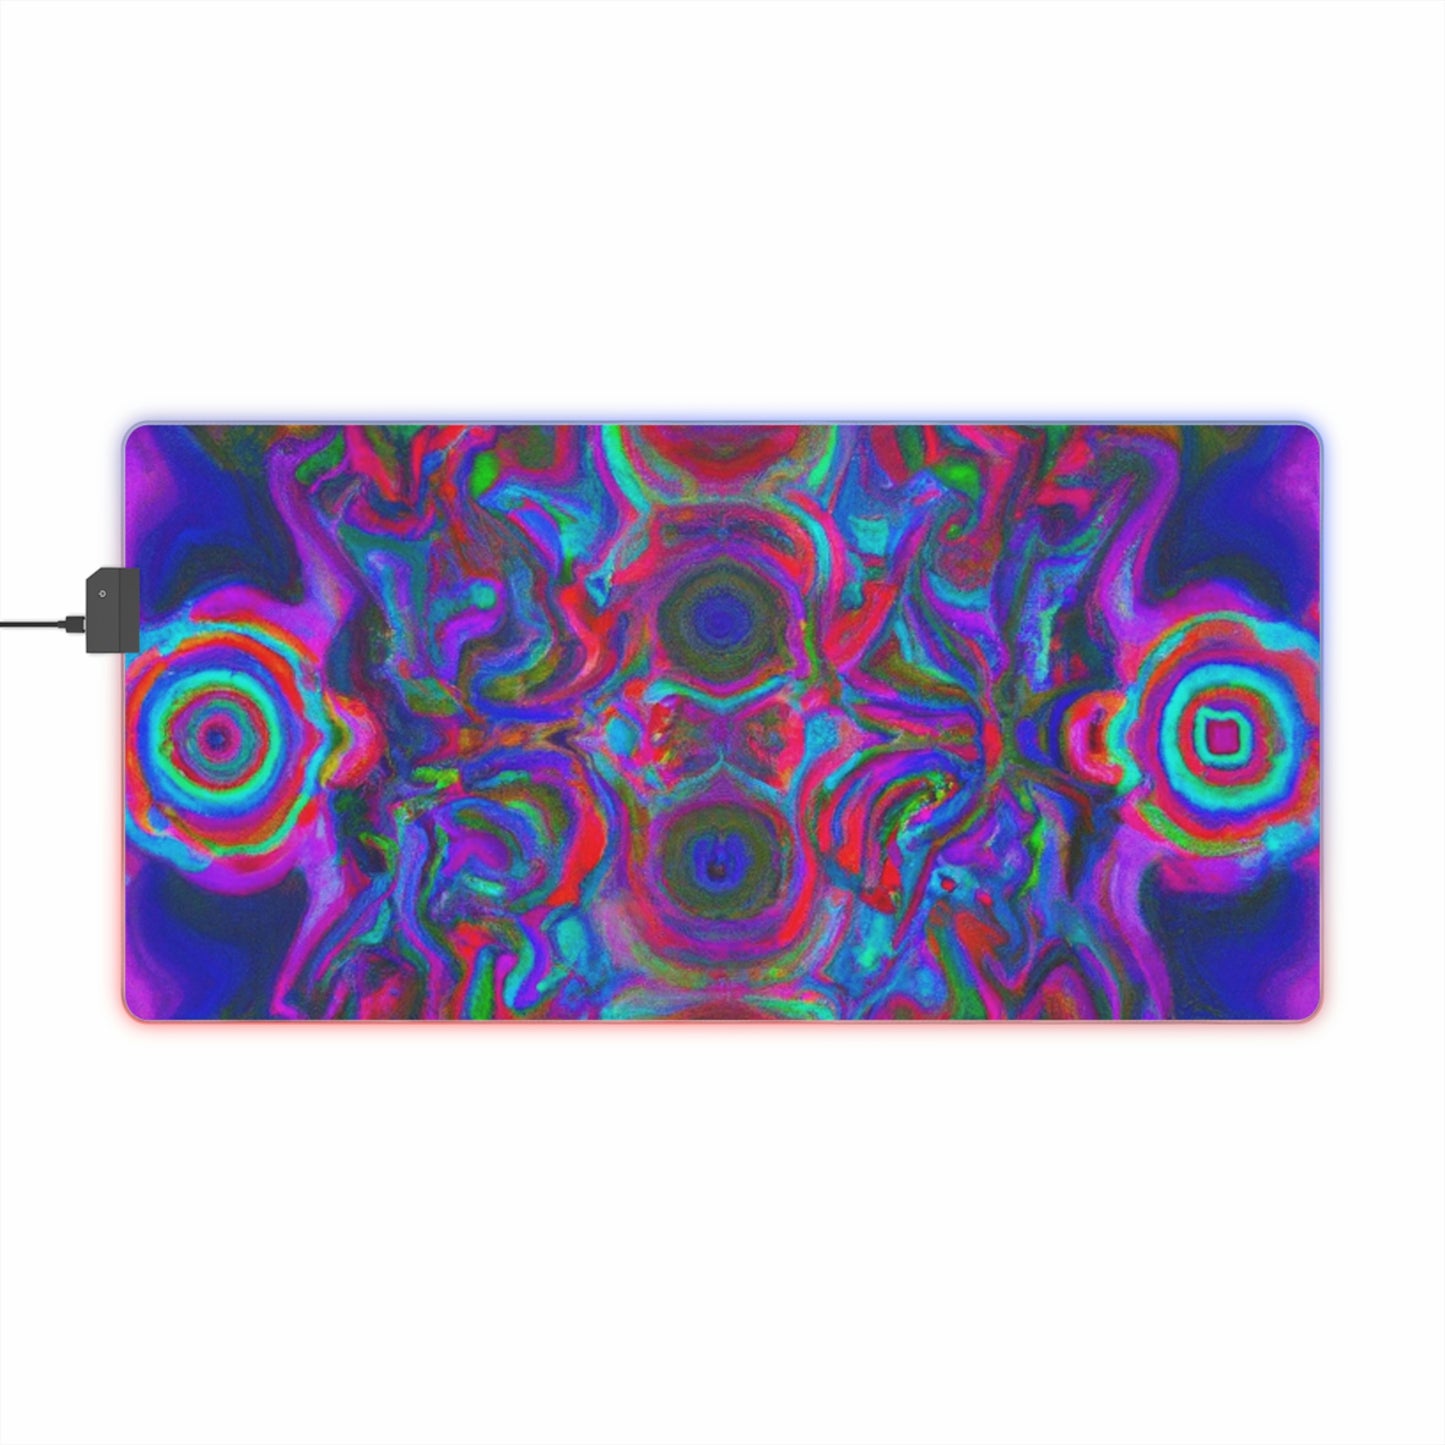 Bix Boppin' Tom - Psychedelic Trippy LED Light Up Gaming Mouse Pad